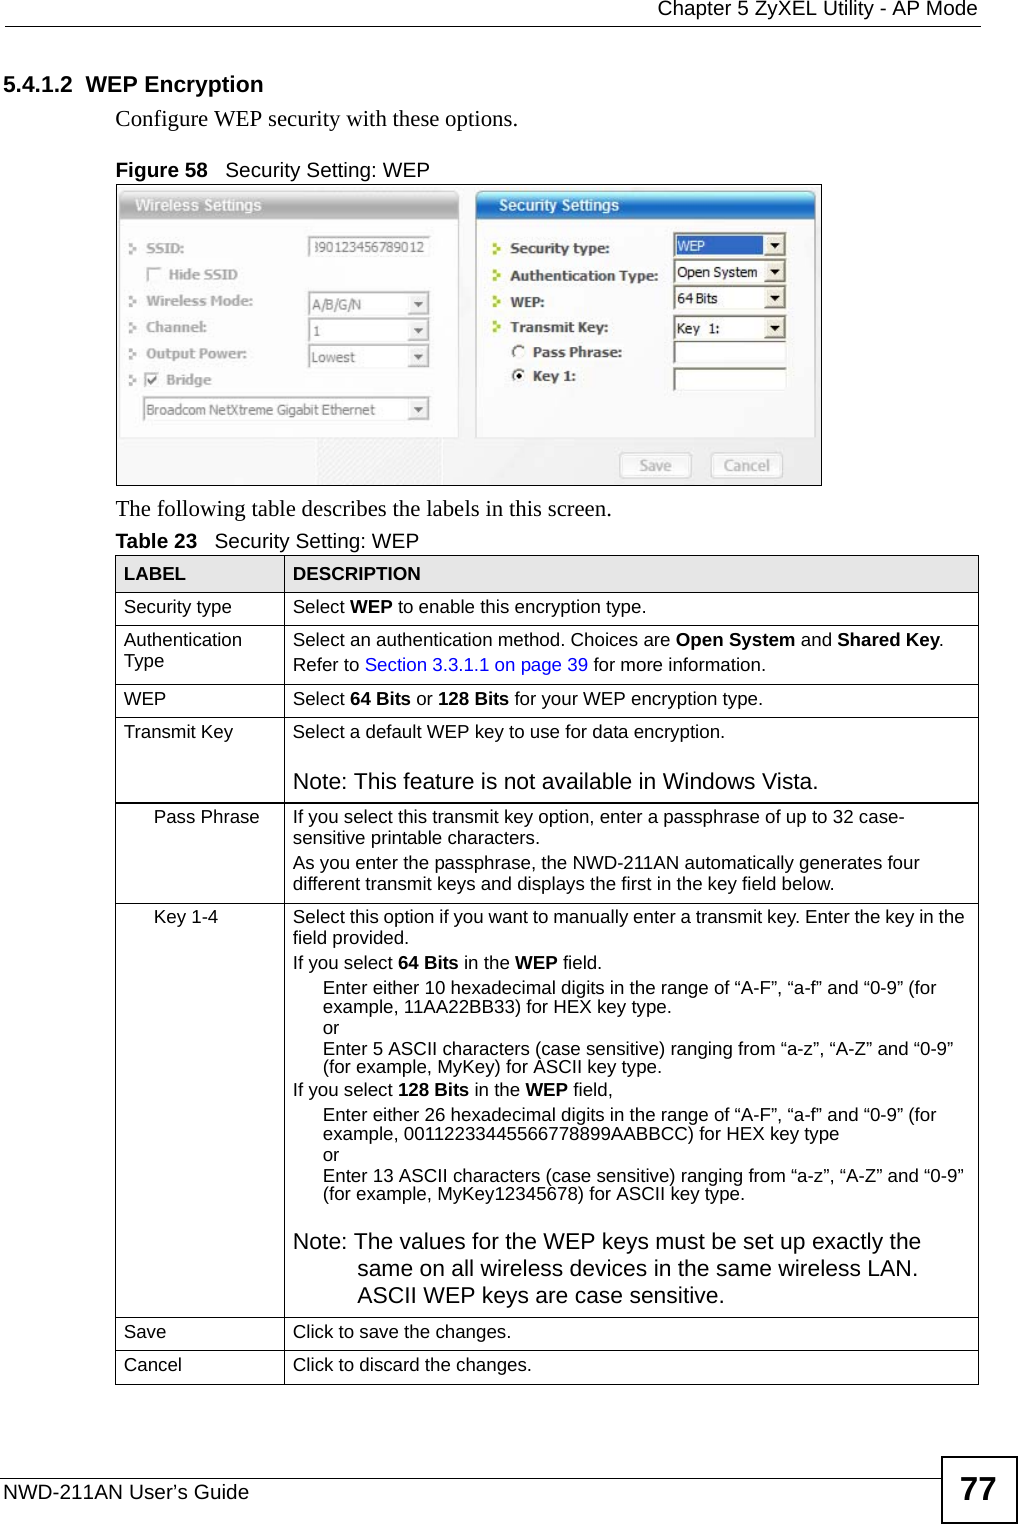  Chapter 5 ZyXEL Utility - AP ModeNWD-211AN User’s Guide 775.4.1.2  WEP EncryptionConfigure WEP security with these options. Figure 58   Security Setting: WEP  The following table describes the labels in this screen.  Table 23   Security Setting: WEP LABEL DESCRIPTIONSecurity type Select WEP to enable this encryption type.Authentication Type Select an authentication method. Choices are Open System and Shared Key.Refer to Section 3.3.1.1 on page 39 for more information.WEP Select 64 Bits or 128 Bits for your WEP encryption type.Transmit Key Select a default WEP key to use for data encryption.Note: This feature is not available in Windows Vista.Pass Phrase If you select this transmit key option, enter a passphrase of up to 32 case-sensitive printable characters. As you enter the passphrase, the NWD-211AN automatically generates four different transmit keys and displays the first in the key field below.Key 1-4 Select this option if you want to manually enter a transmit key. Enter the key in the field provided.If you select 64 Bits in the WEP field.Enter either 10 hexadecimal digits in the range of “A-F”, “a-f” and “0-9” (for example, 11AA22BB33) for HEX key type.orEnter 5 ASCII characters (case sensitive) ranging from “a-z”, “A-Z” and “0-9” (for example, MyKey) for ASCII key type. If you select 128 Bits in the WEP field,Enter either 26 hexadecimal digits in the range of “A-F”, “a-f” and “0-9” (for example, 00112233445566778899AABBCC) for HEX key typeorEnter 13 ASCII characters (case sensitive) ranging from “a-z”, “A-Z” and “0-9” (for example, MyKey12345678) for ASCII key type.Note: The values for the WEP keys must be set up exactly the same on all wireless devices in the same wireless LAN. ASCII WEP keys are case sensitive.Save Click to save the changes.Cancel Click to discard the changes.